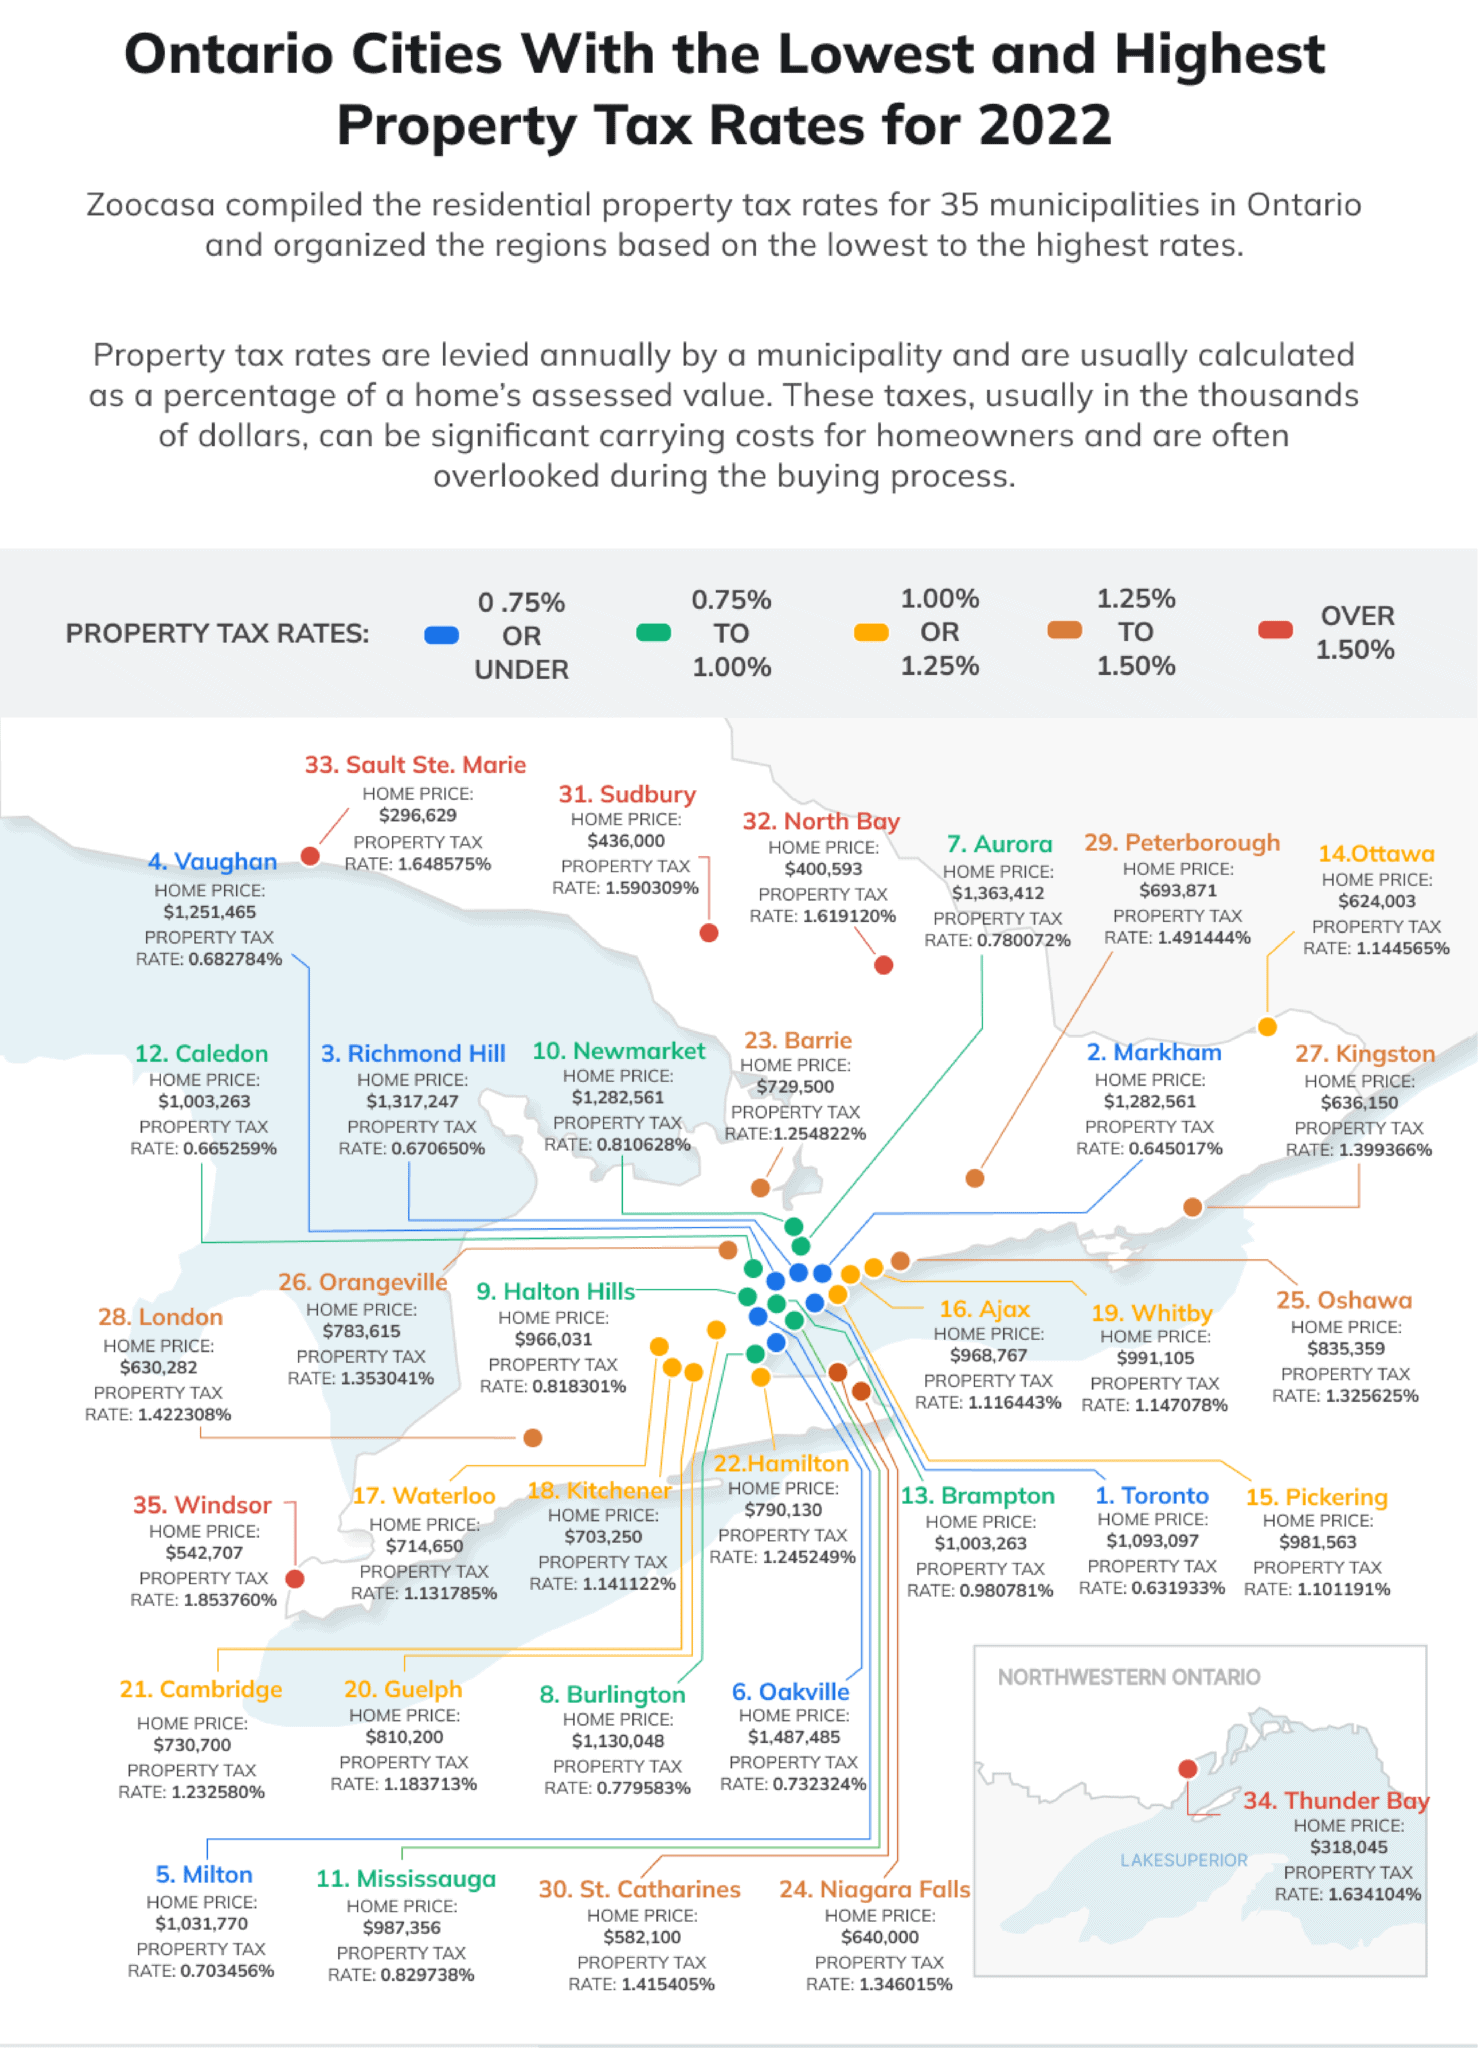 How Hamilton property tax rates compare to other Ontario municipalities